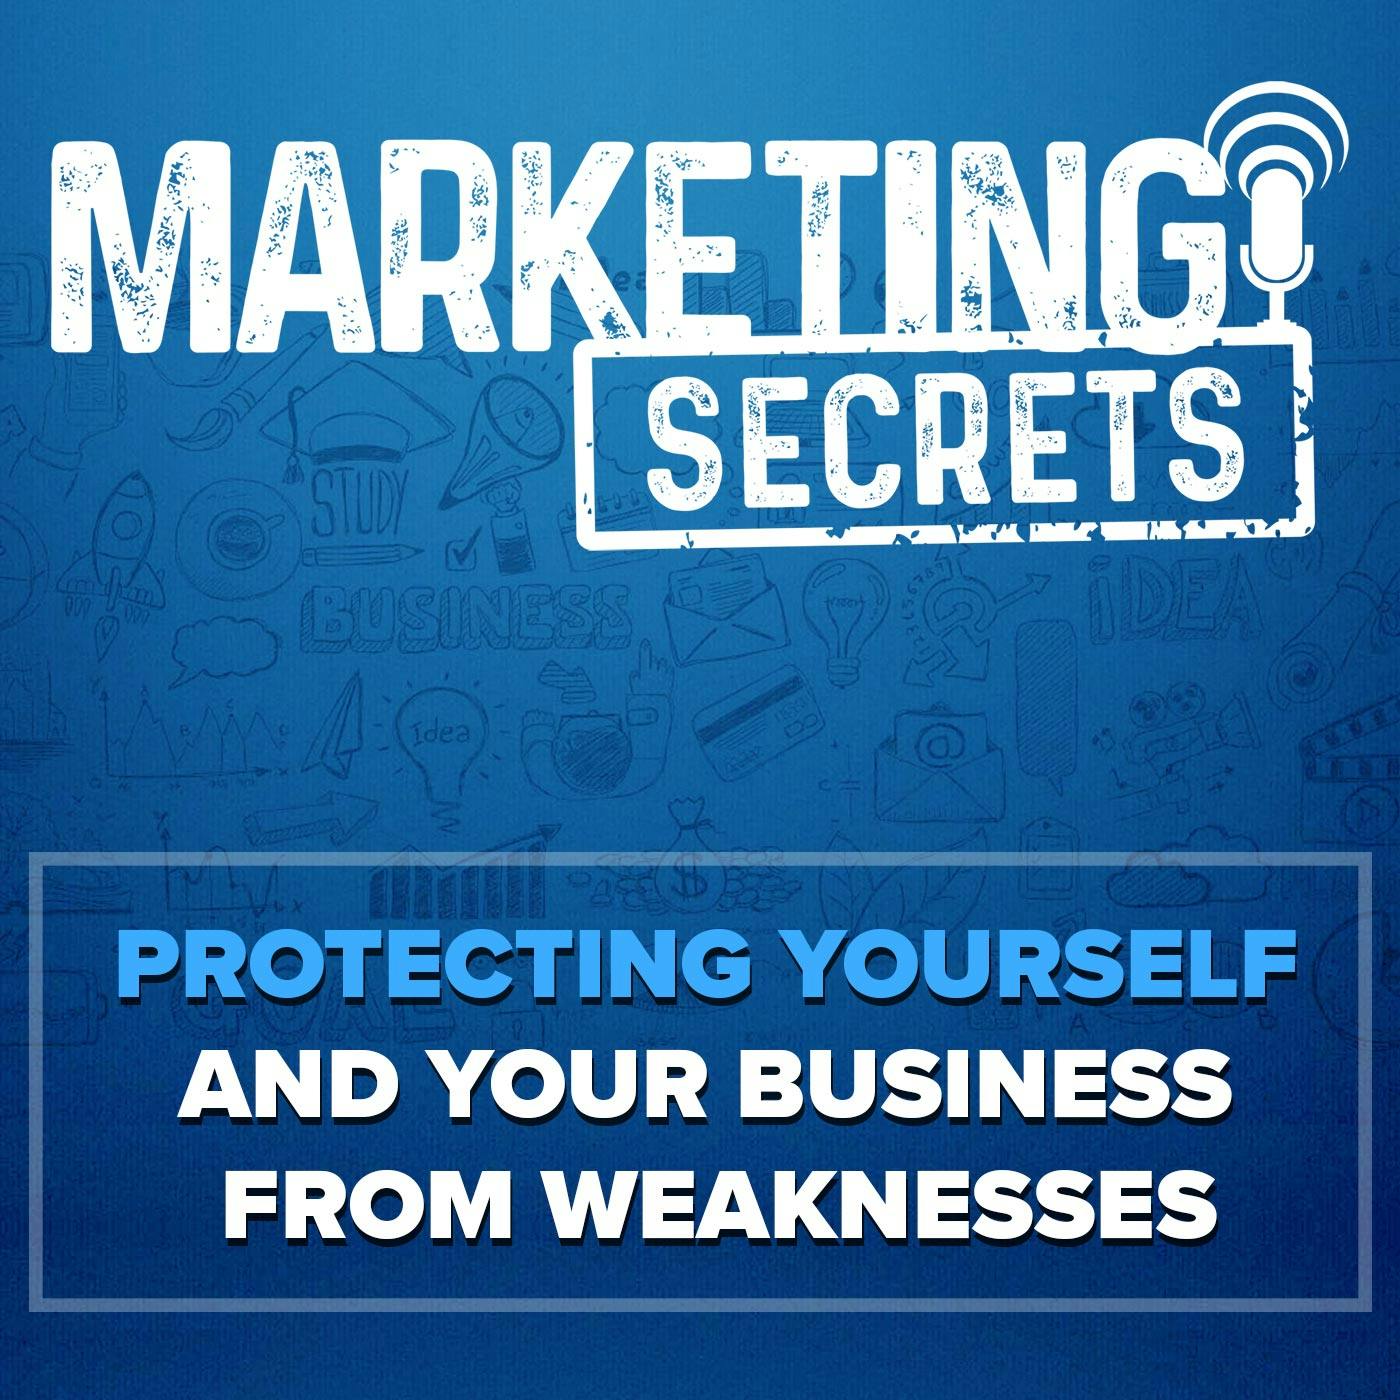 Protecting Yourself and Your Business From Weaknesses